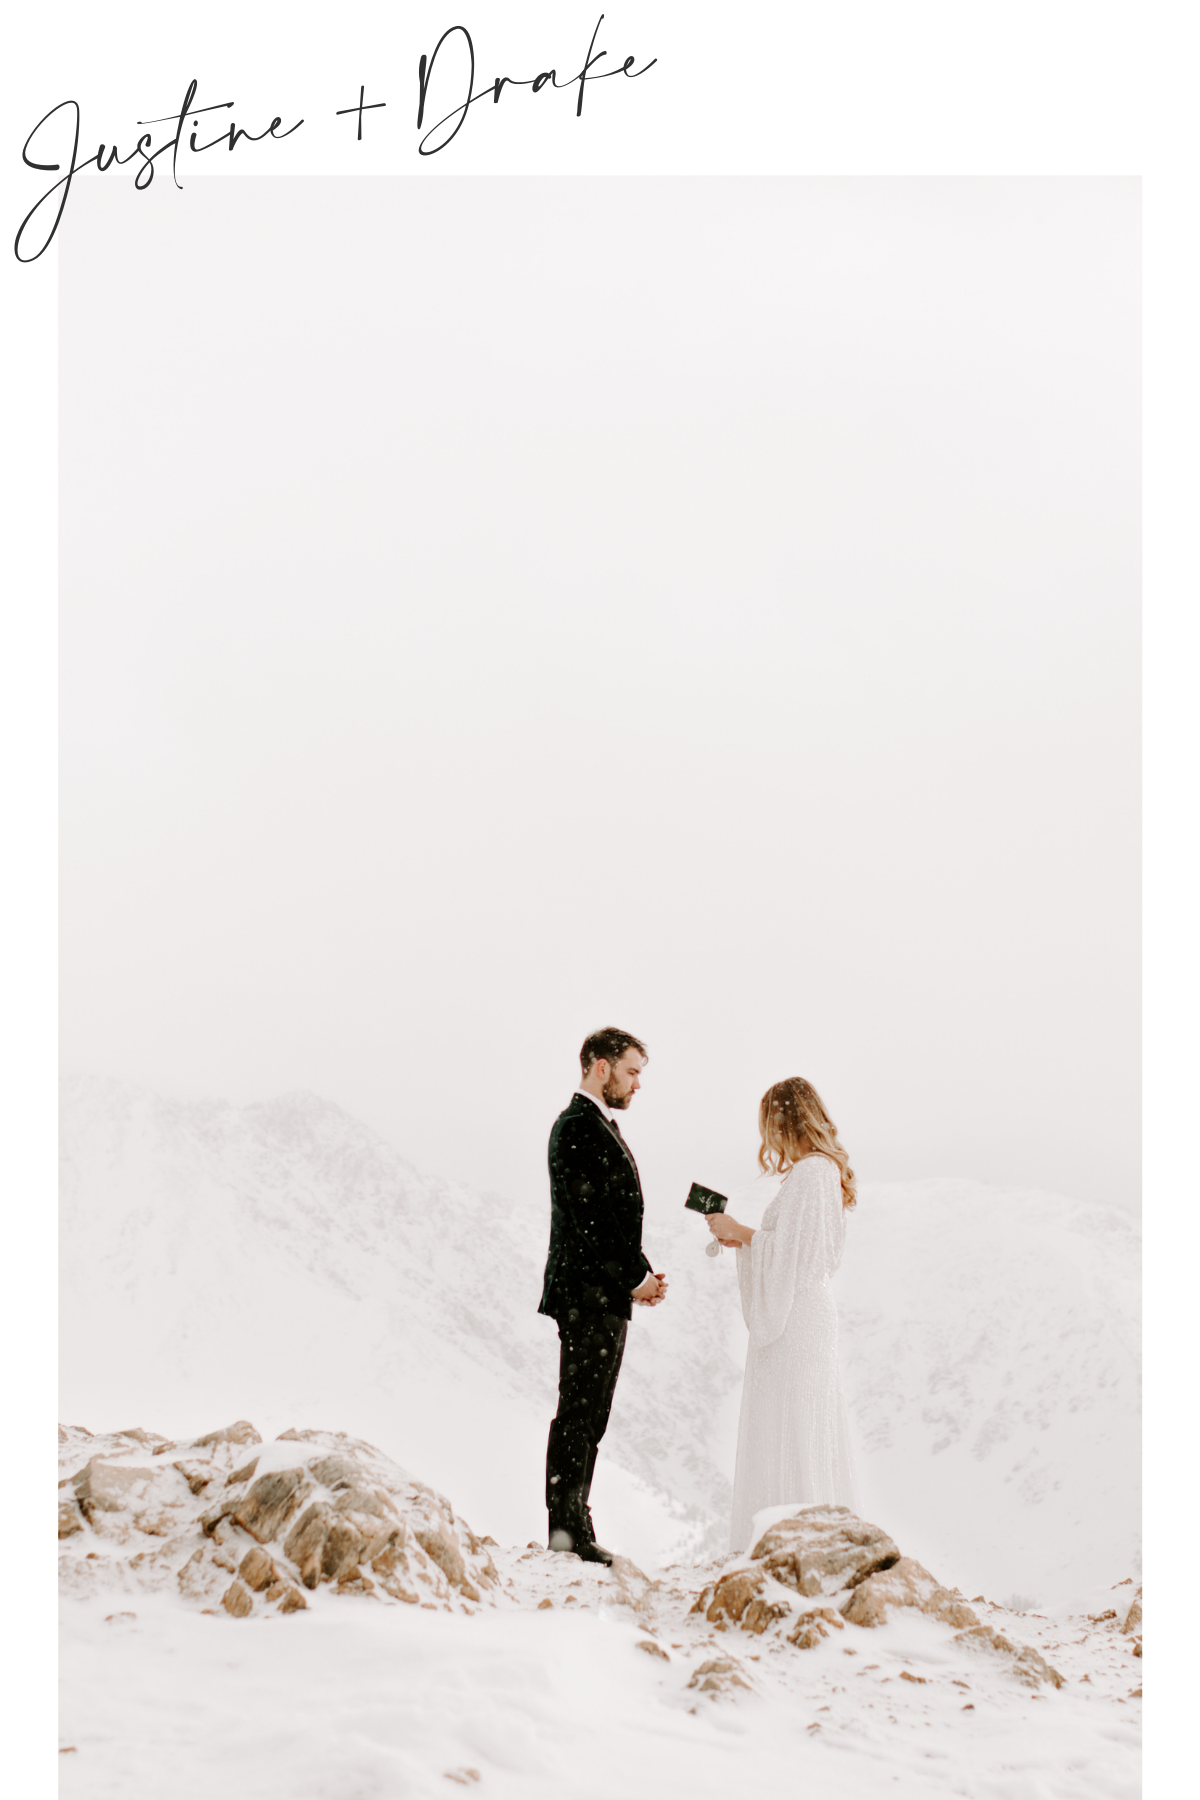 Couple reading vows to each other during magical snowy winter elopement while snowing at the top of Loveland Pass in Colorado with elopement photographer Diana Coulter